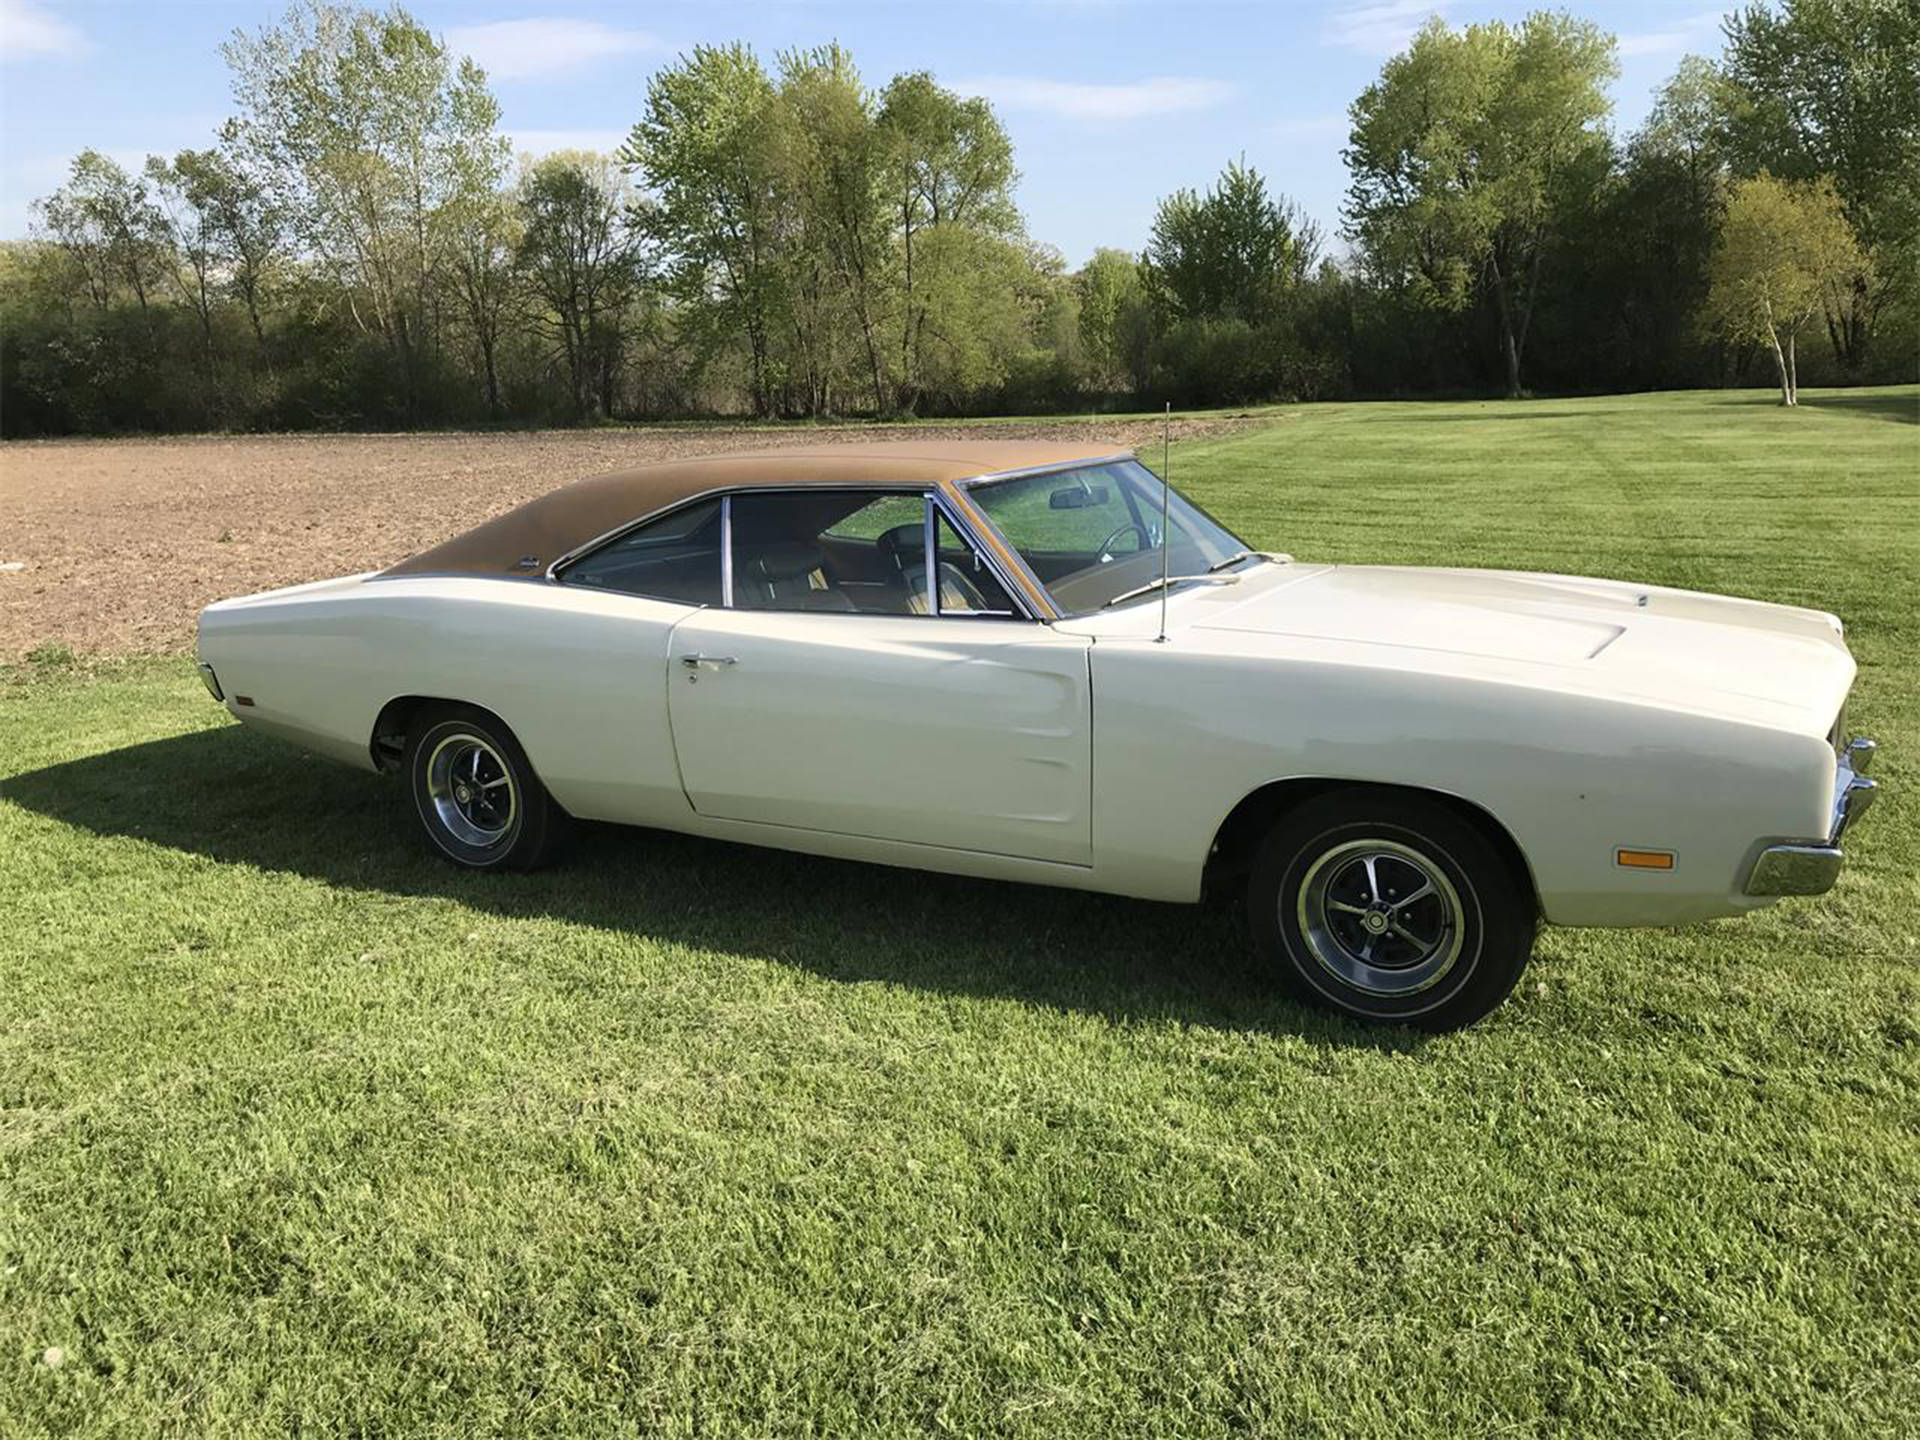 Caption: Pristine 1969 Dodge Charger In White Background